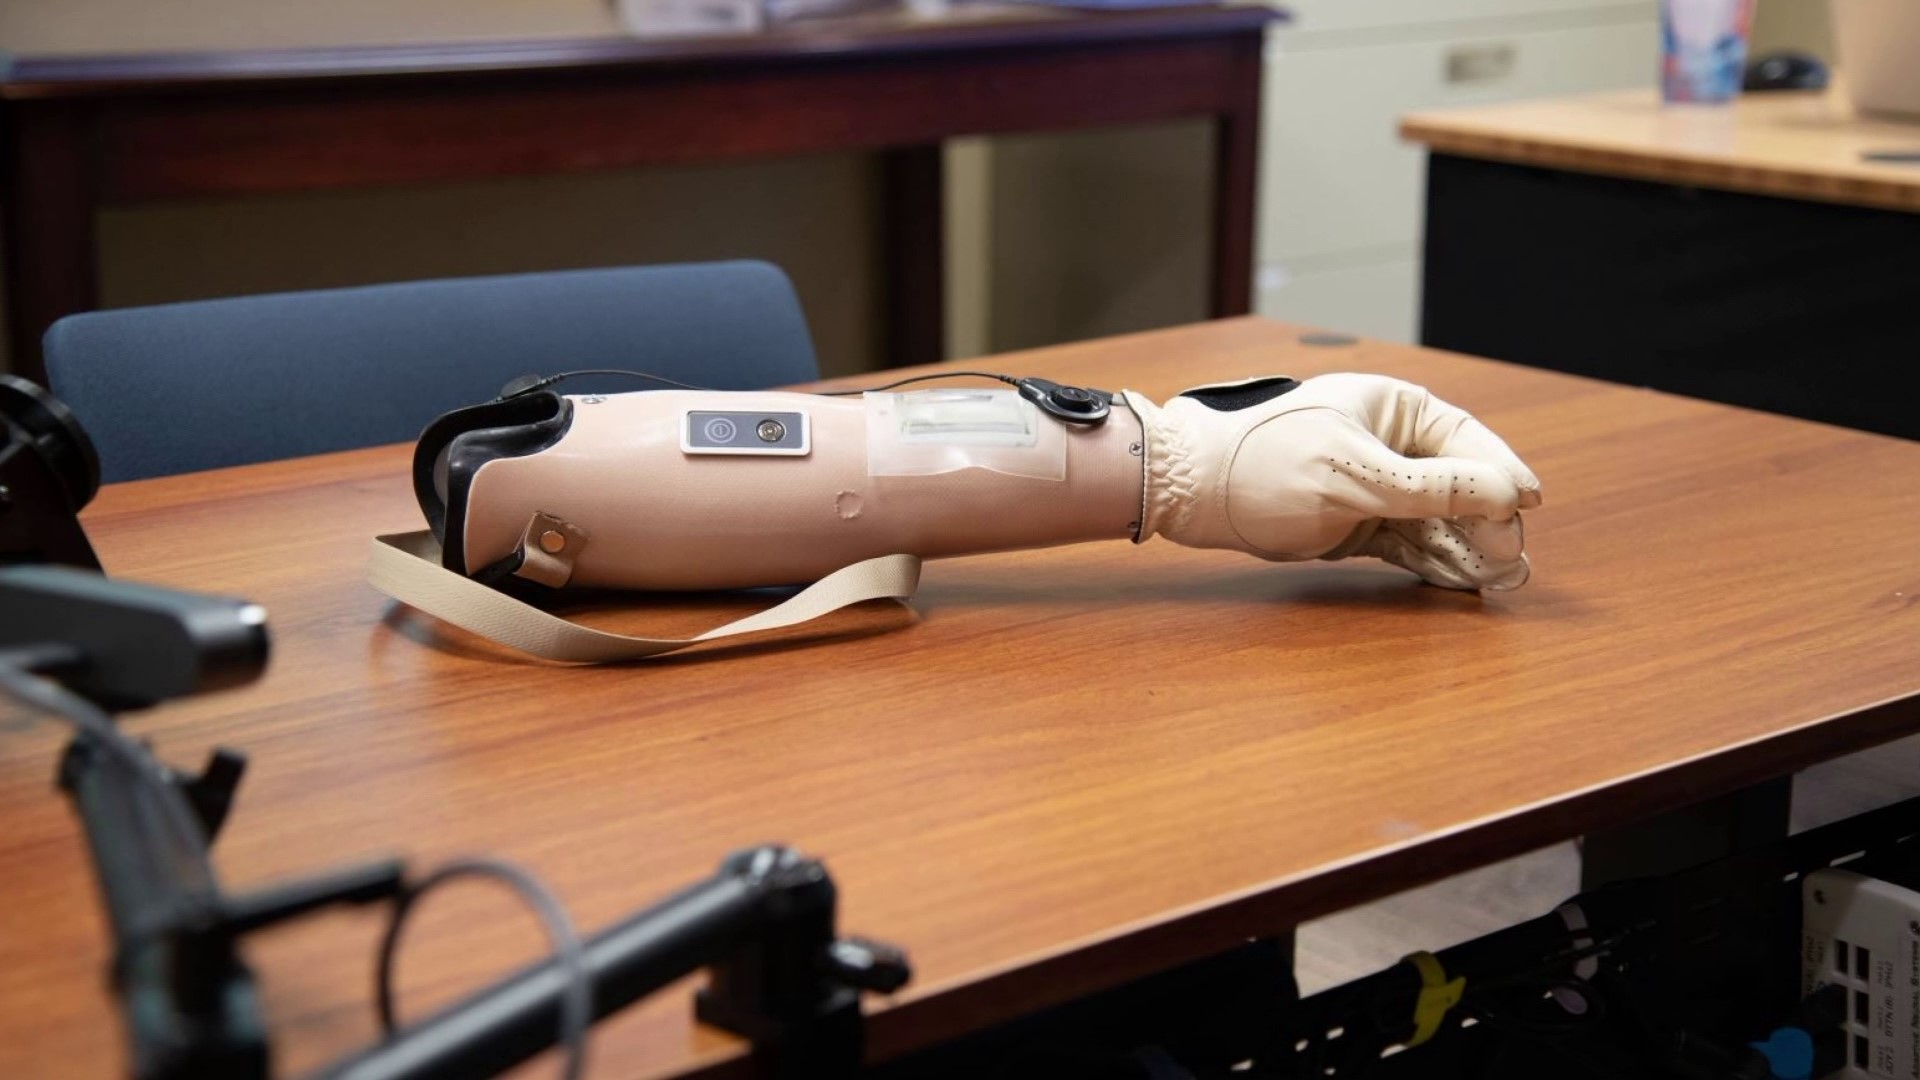 U of A granted $4.9 million for prosthesis research